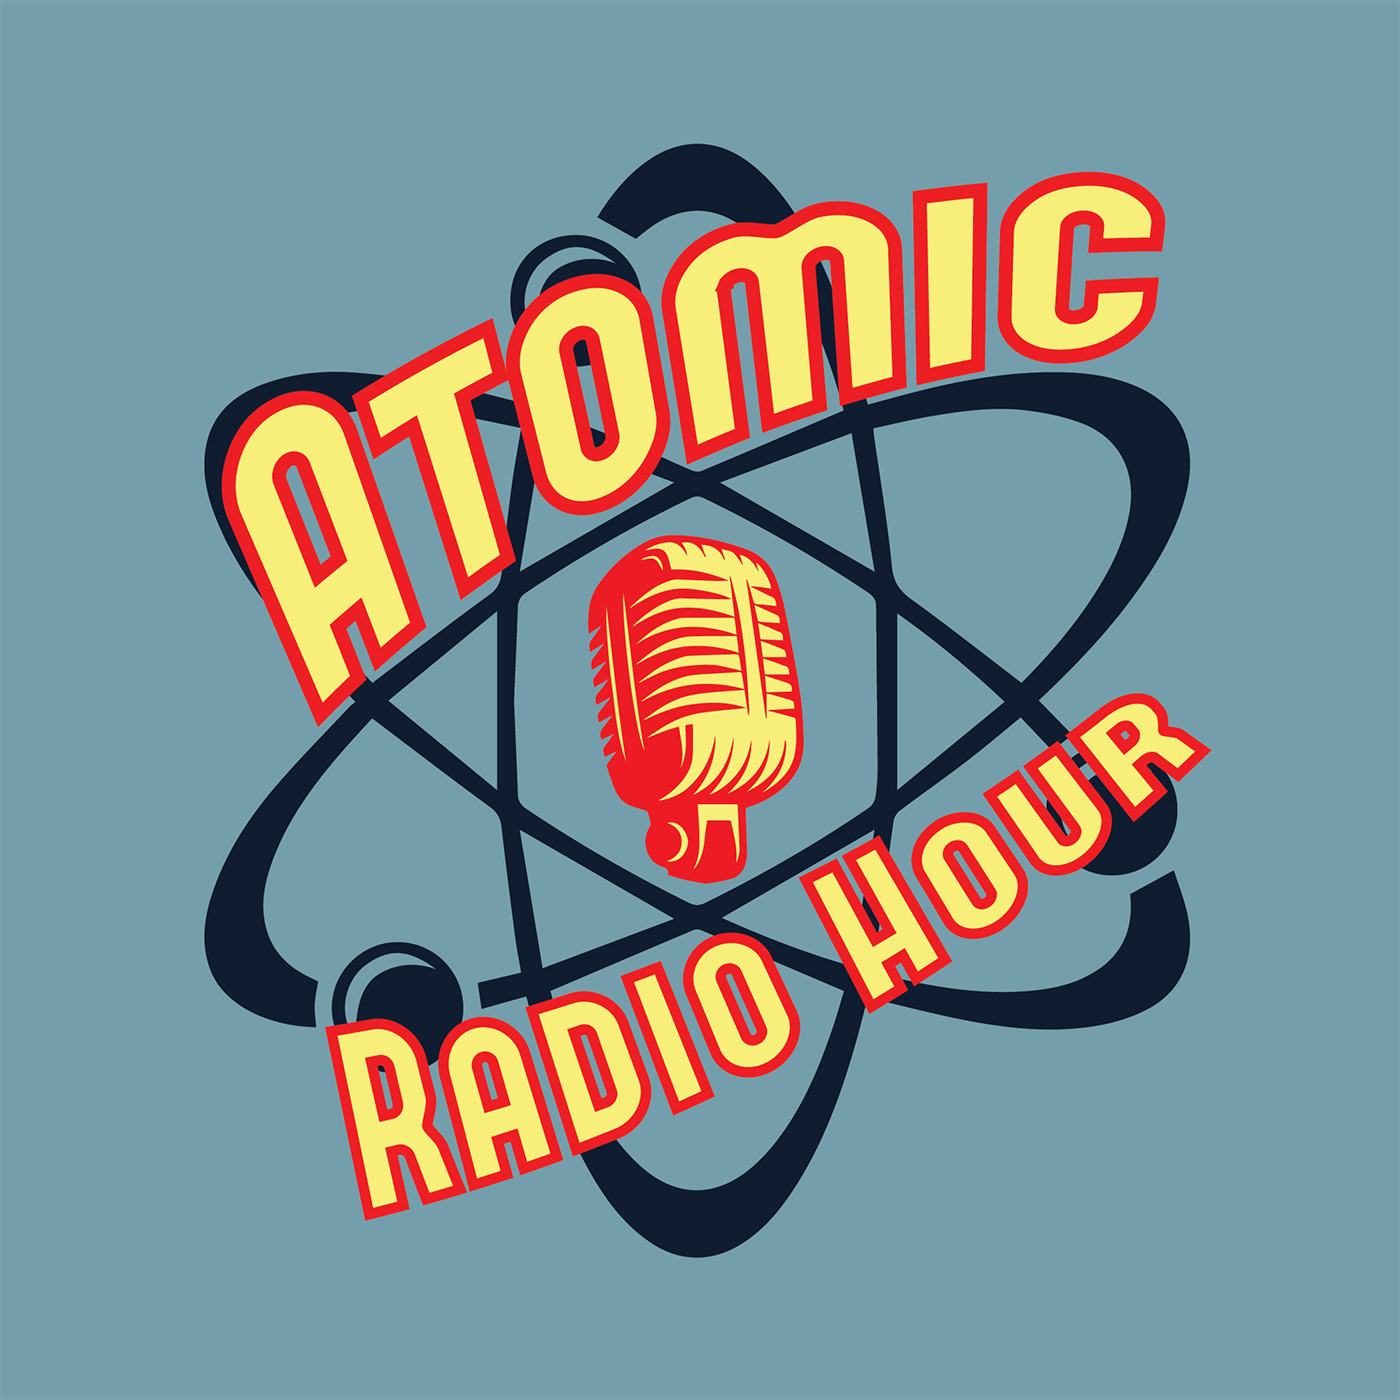 Atomic Radio Hour - Episode 81 - We Talk About the Radio for an Hour